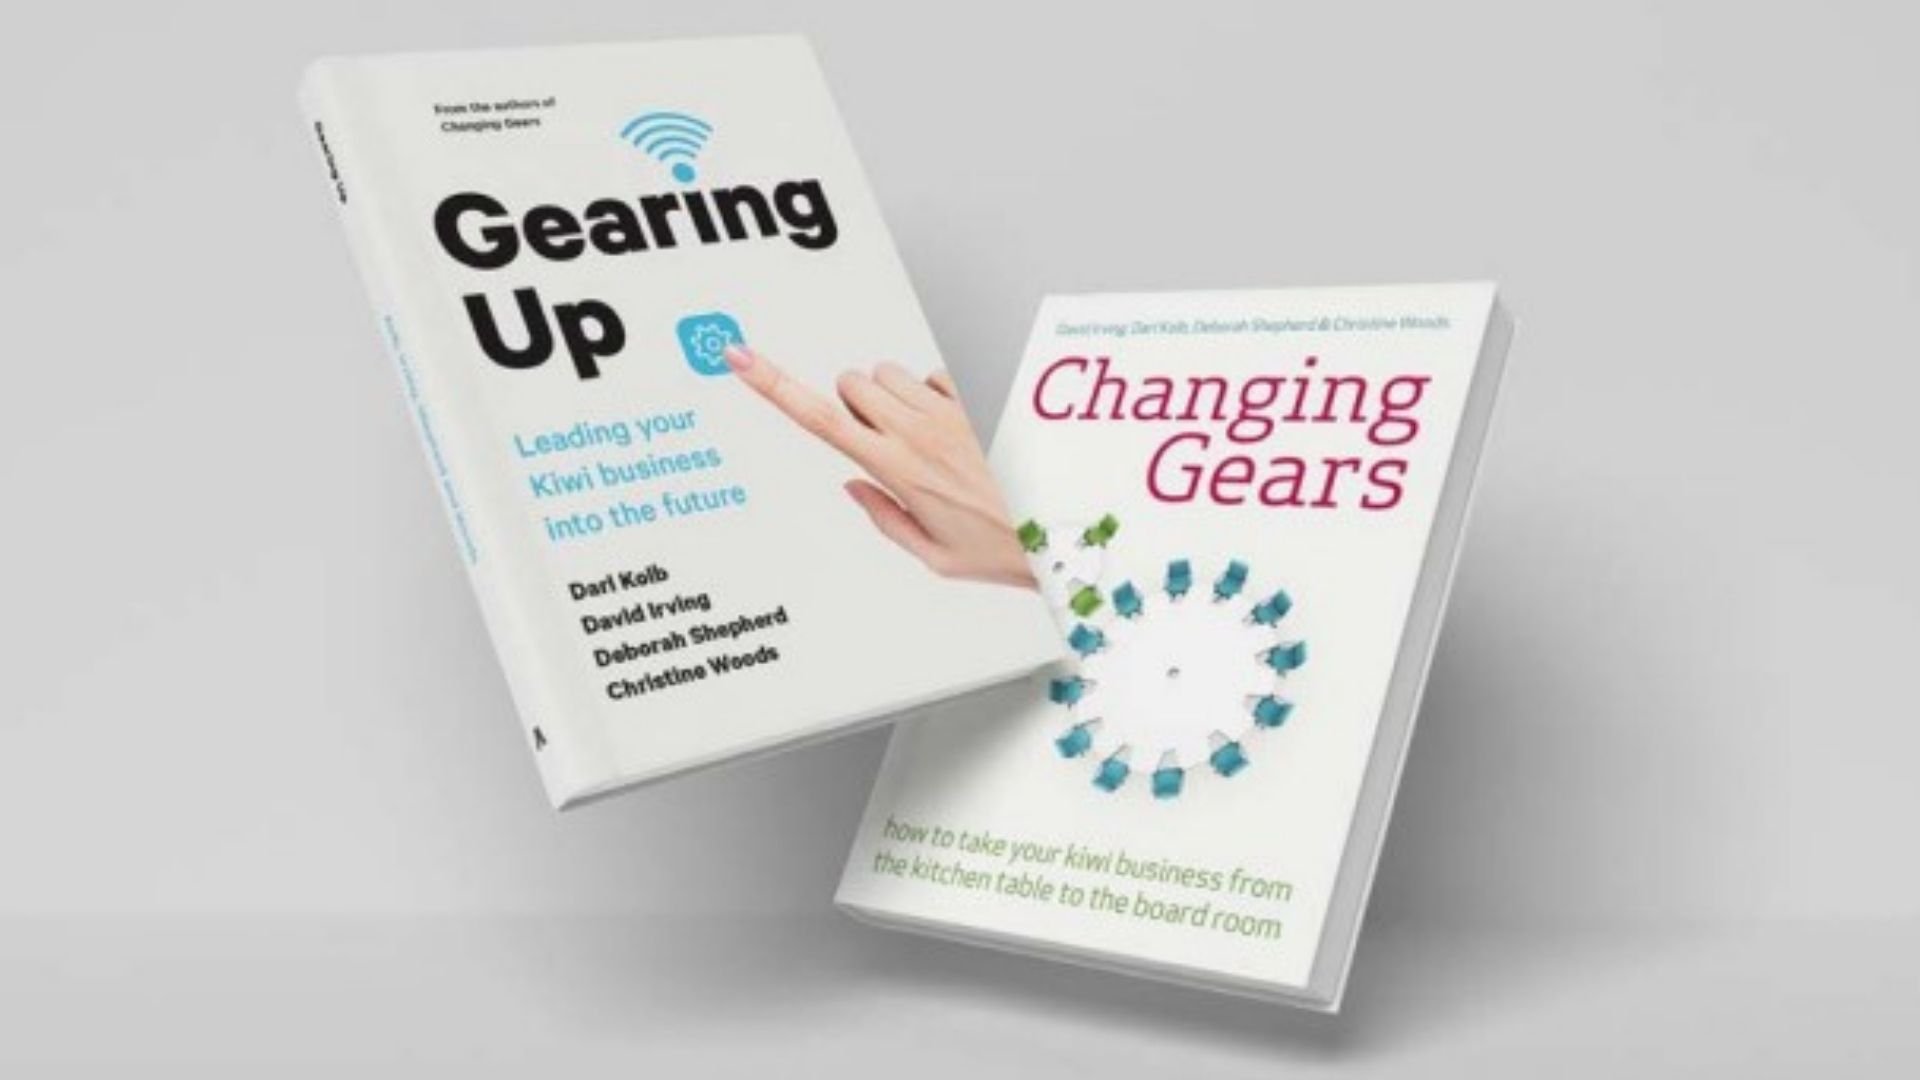 Gearing Up and Changing Gears Books